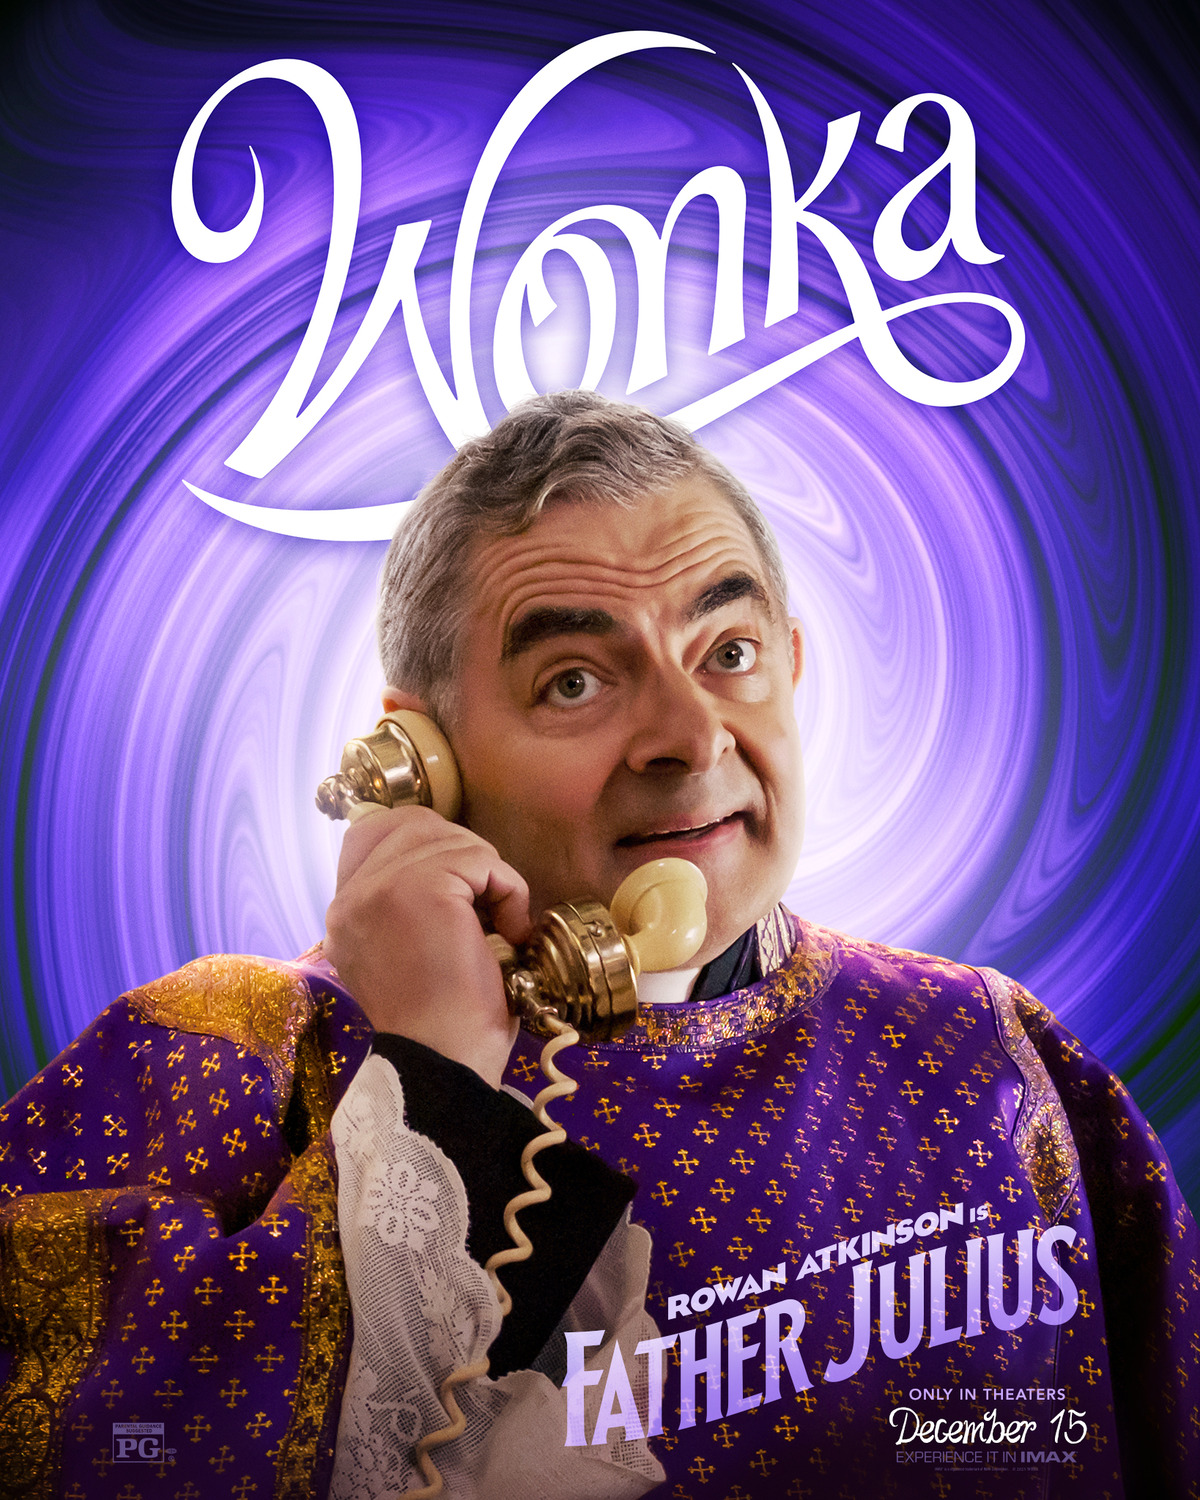 Extra Large Movie Poster Image for Wonka (#11 of 22)